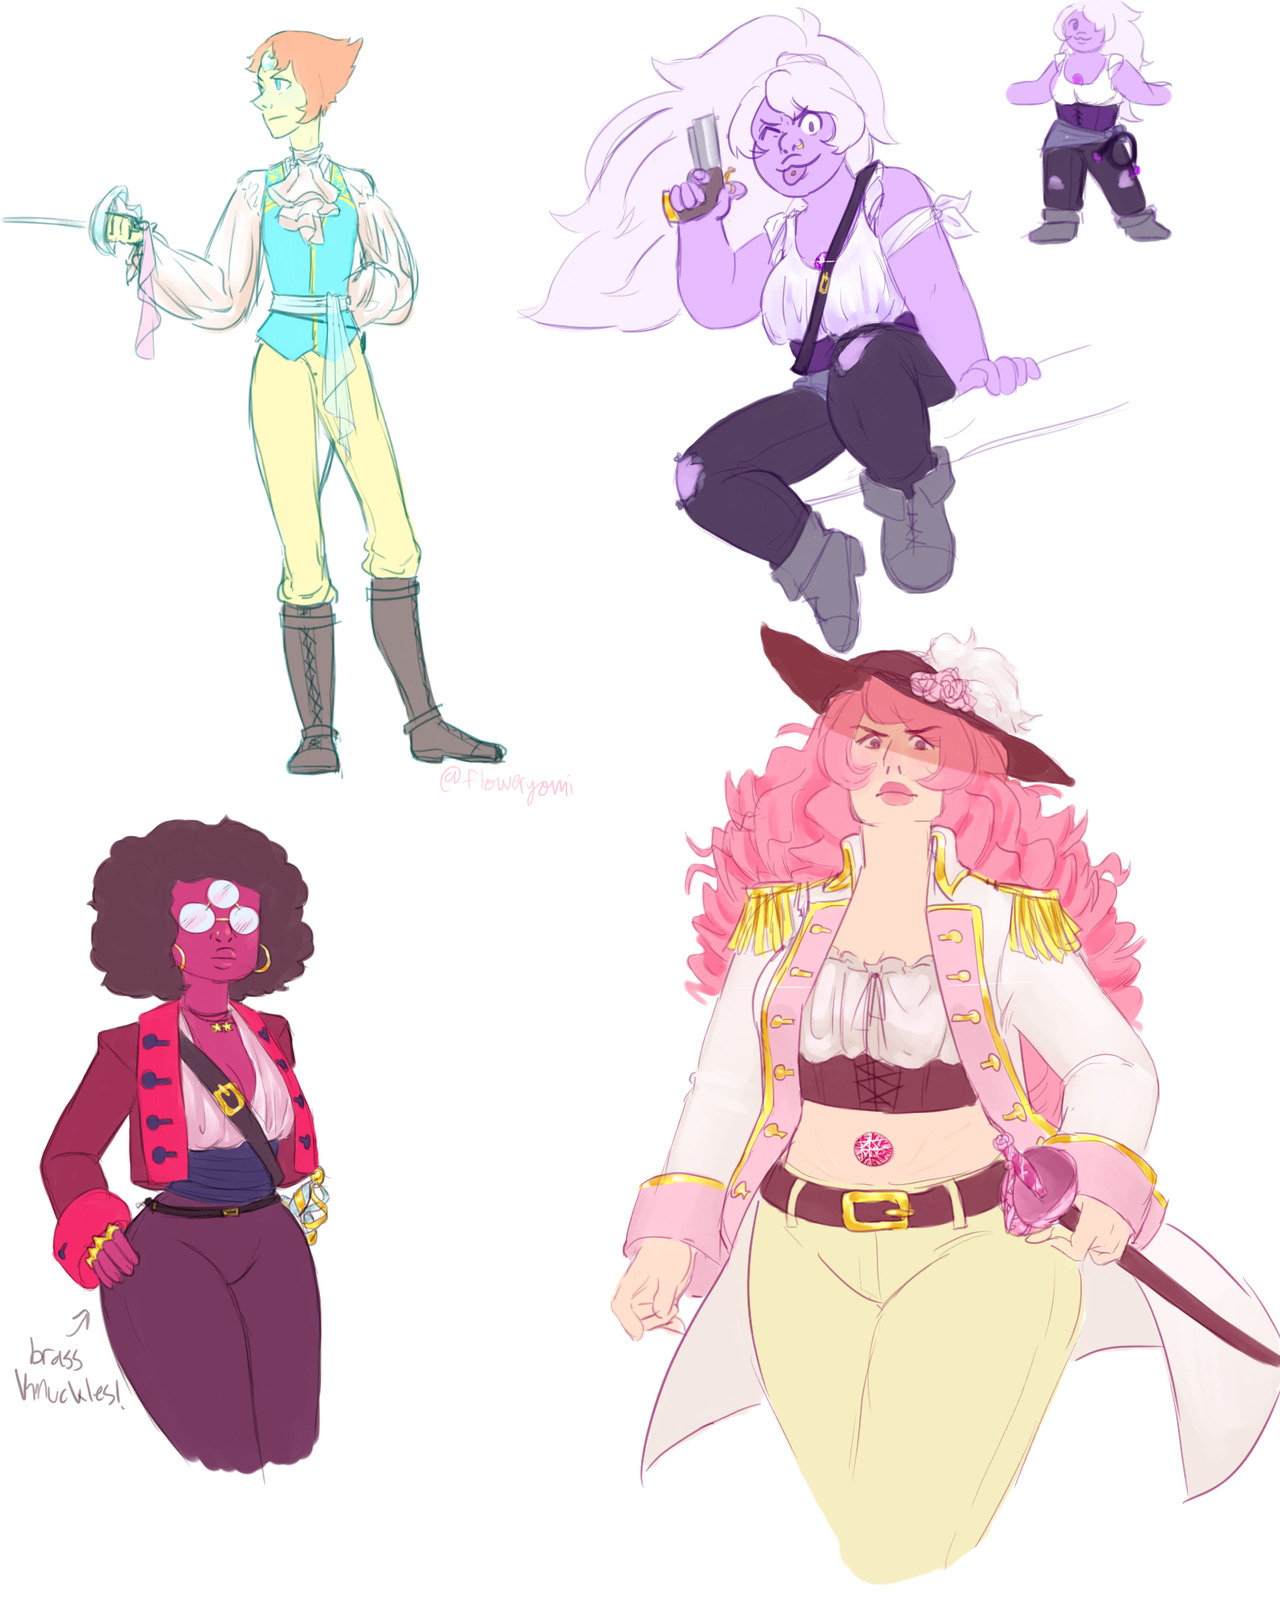 The bulk of the Crystal Gem crew! Jasper and Bismuth and Alexandrite and some others will come soonish along with a more finalized Malachite